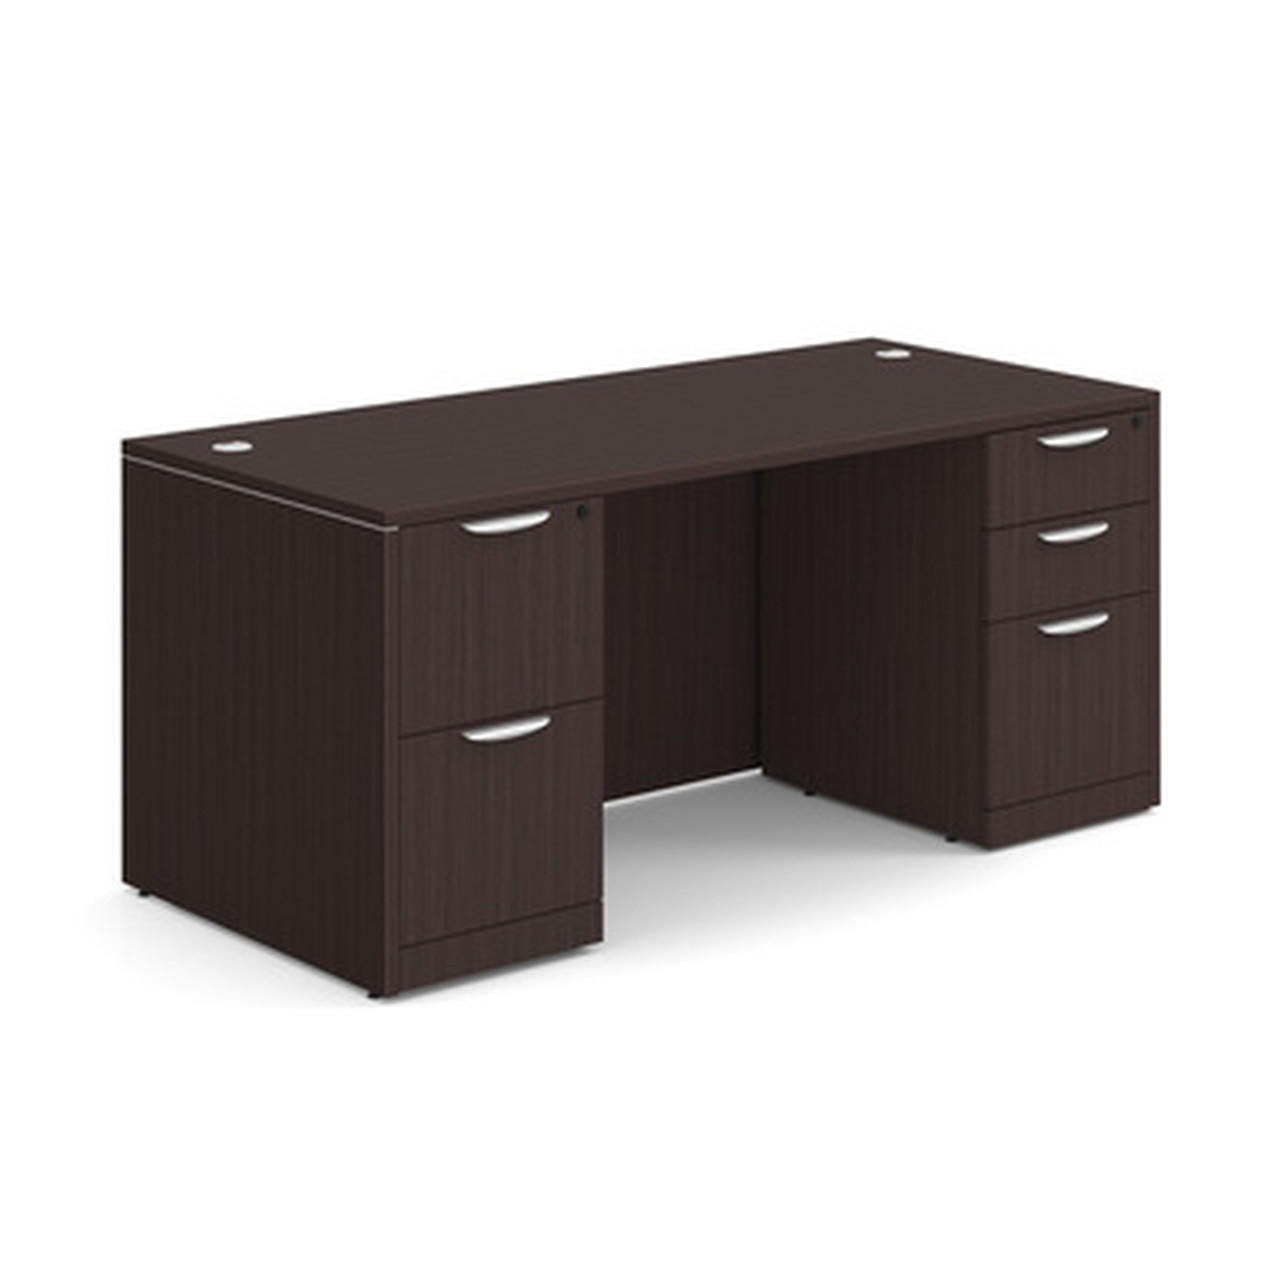  Office Source OS Laminate Collection 66" x 30" Double Pedestal Desk DBLFDPL102 